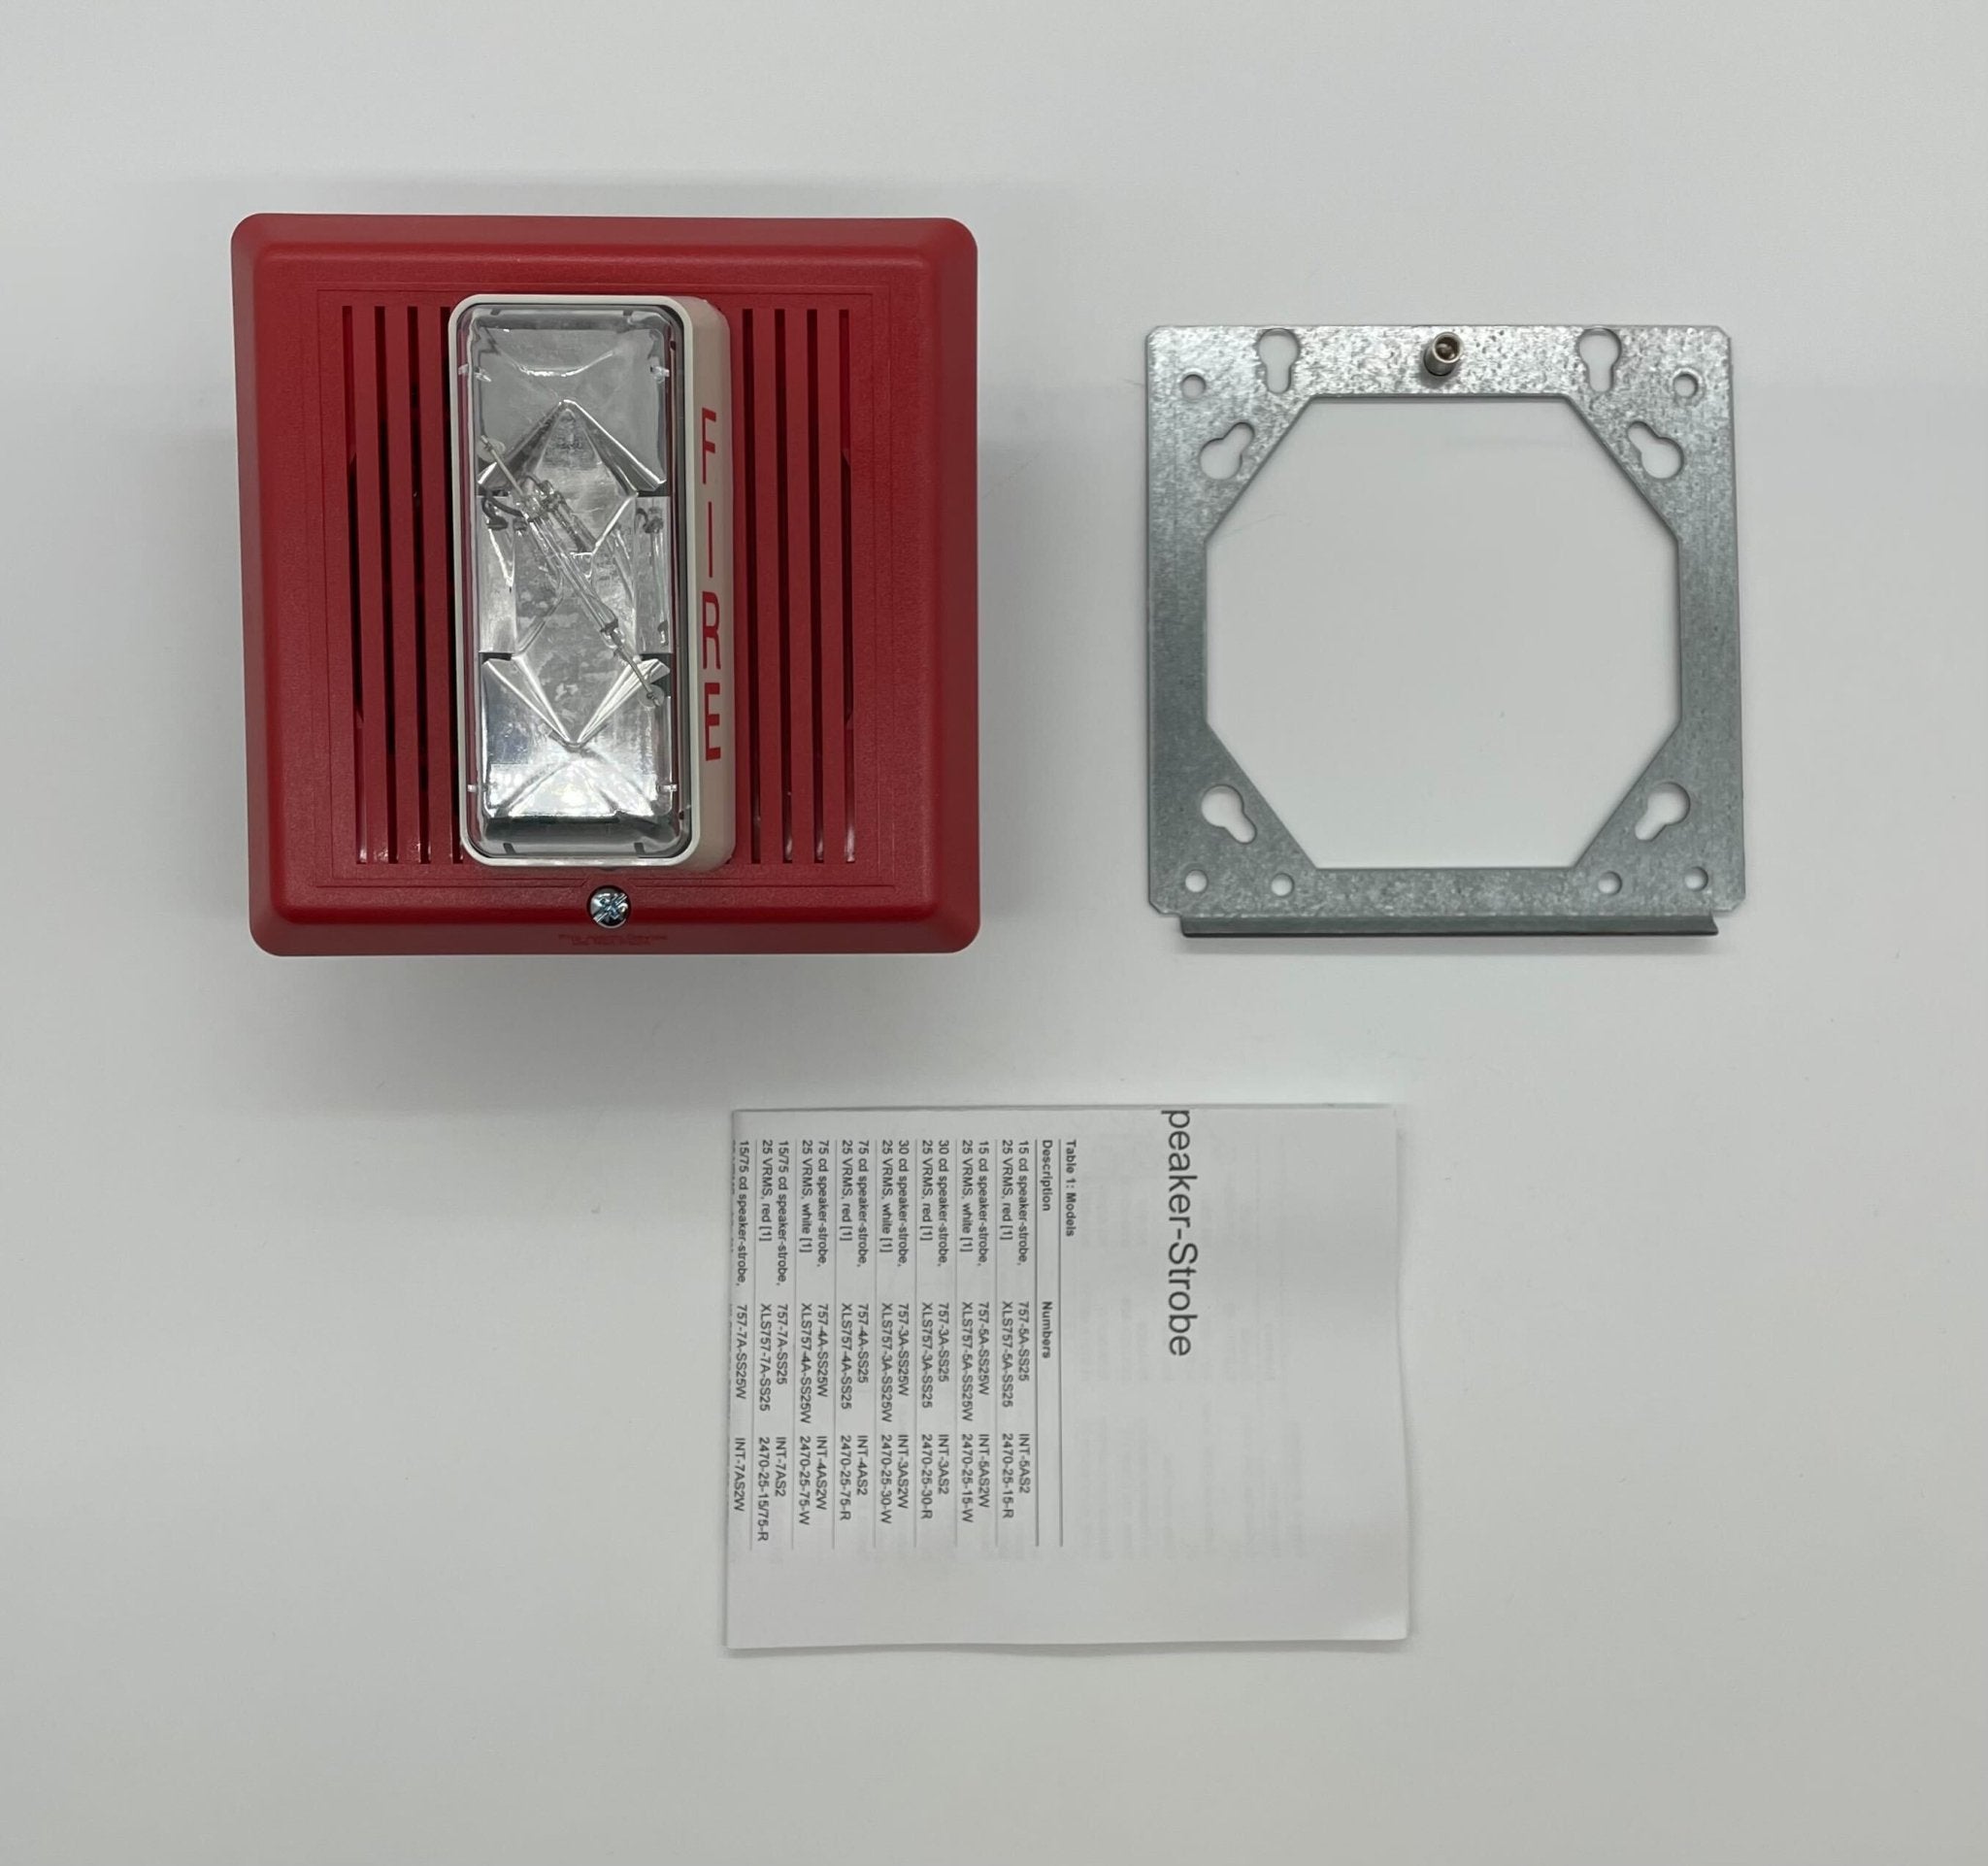 Edwards 757-7A-SS70 - The Fire Alarm Supplier